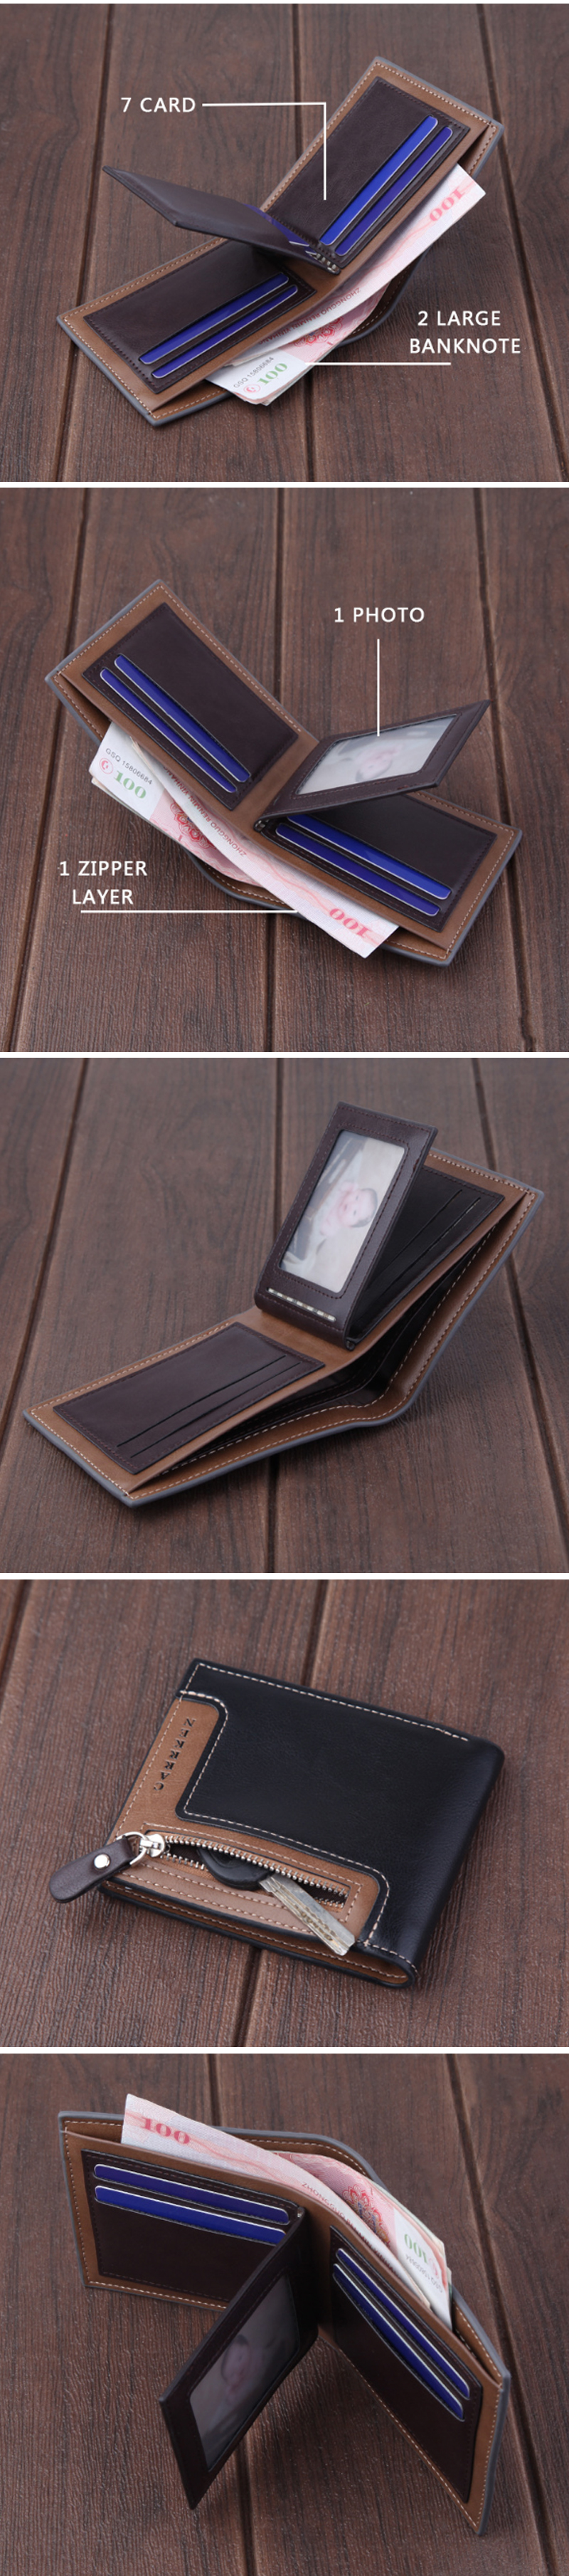 IPReereg-Mens-Short-Wallet-Leather-Travel-Trifold-ID-Credit-Card-Holder-Coin-Purse-1604813-2